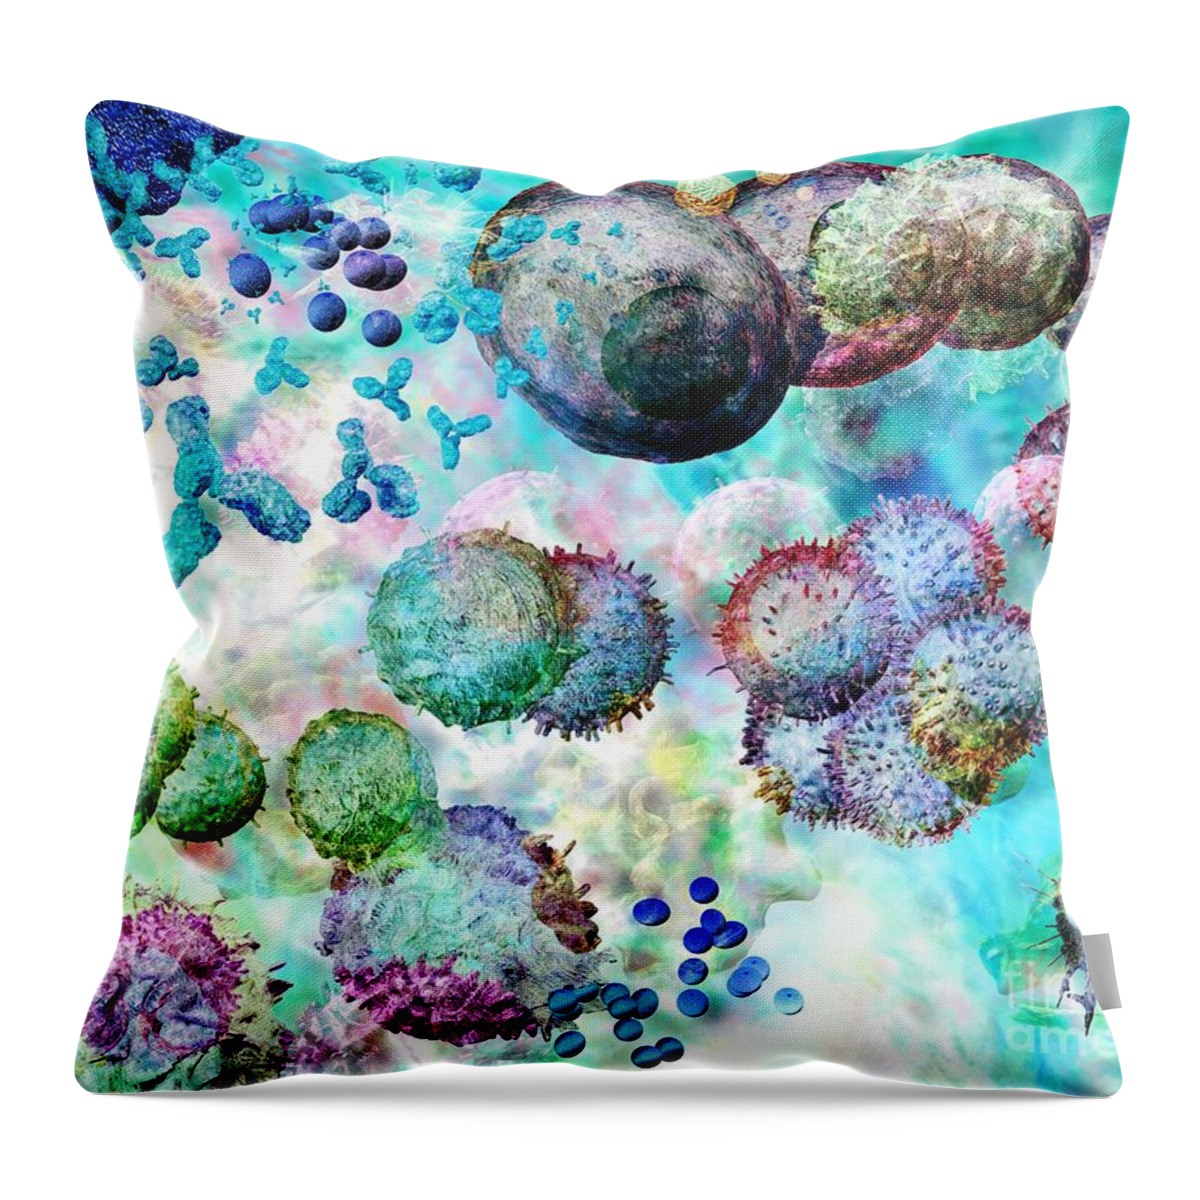 Acid Etch Throw Pillow featuring the digital art Immune Dreaming 1 by Russell Kightley